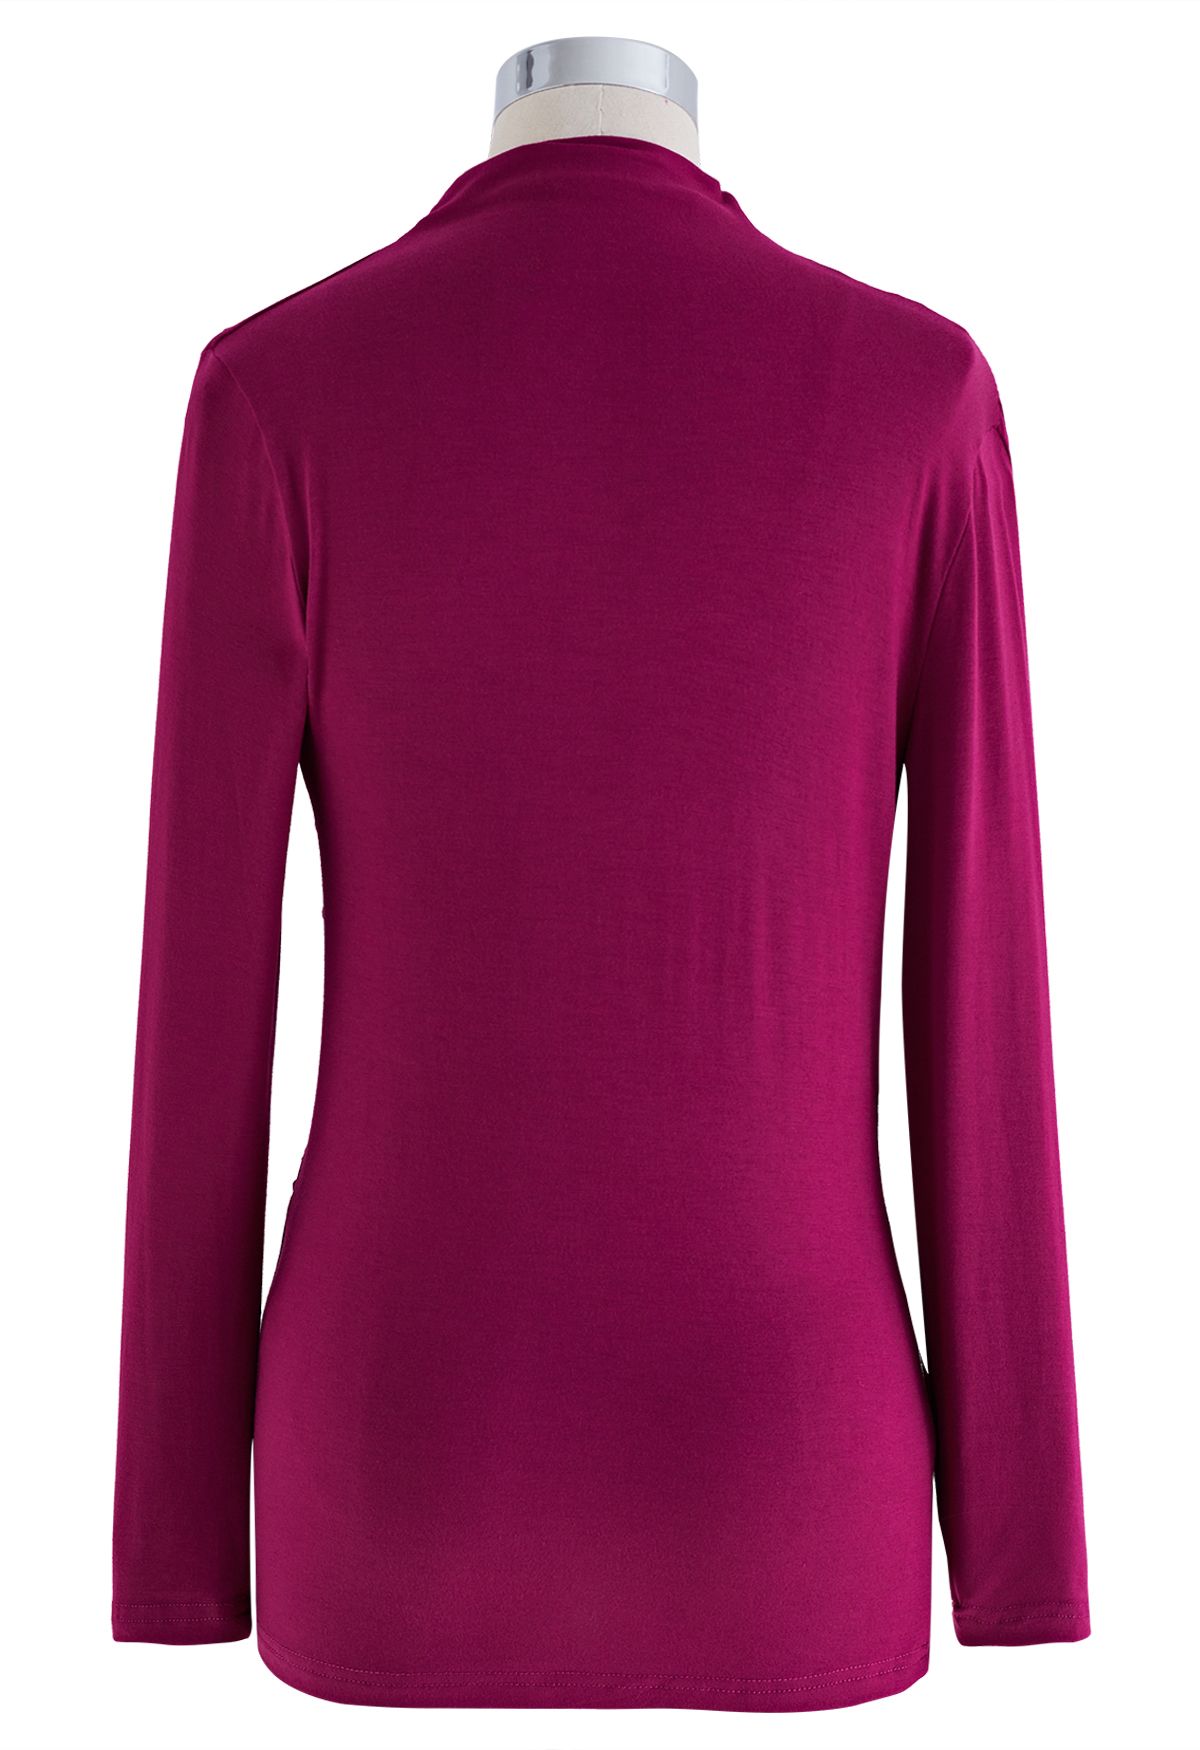 Ruched Long Sleeves Top in Berry